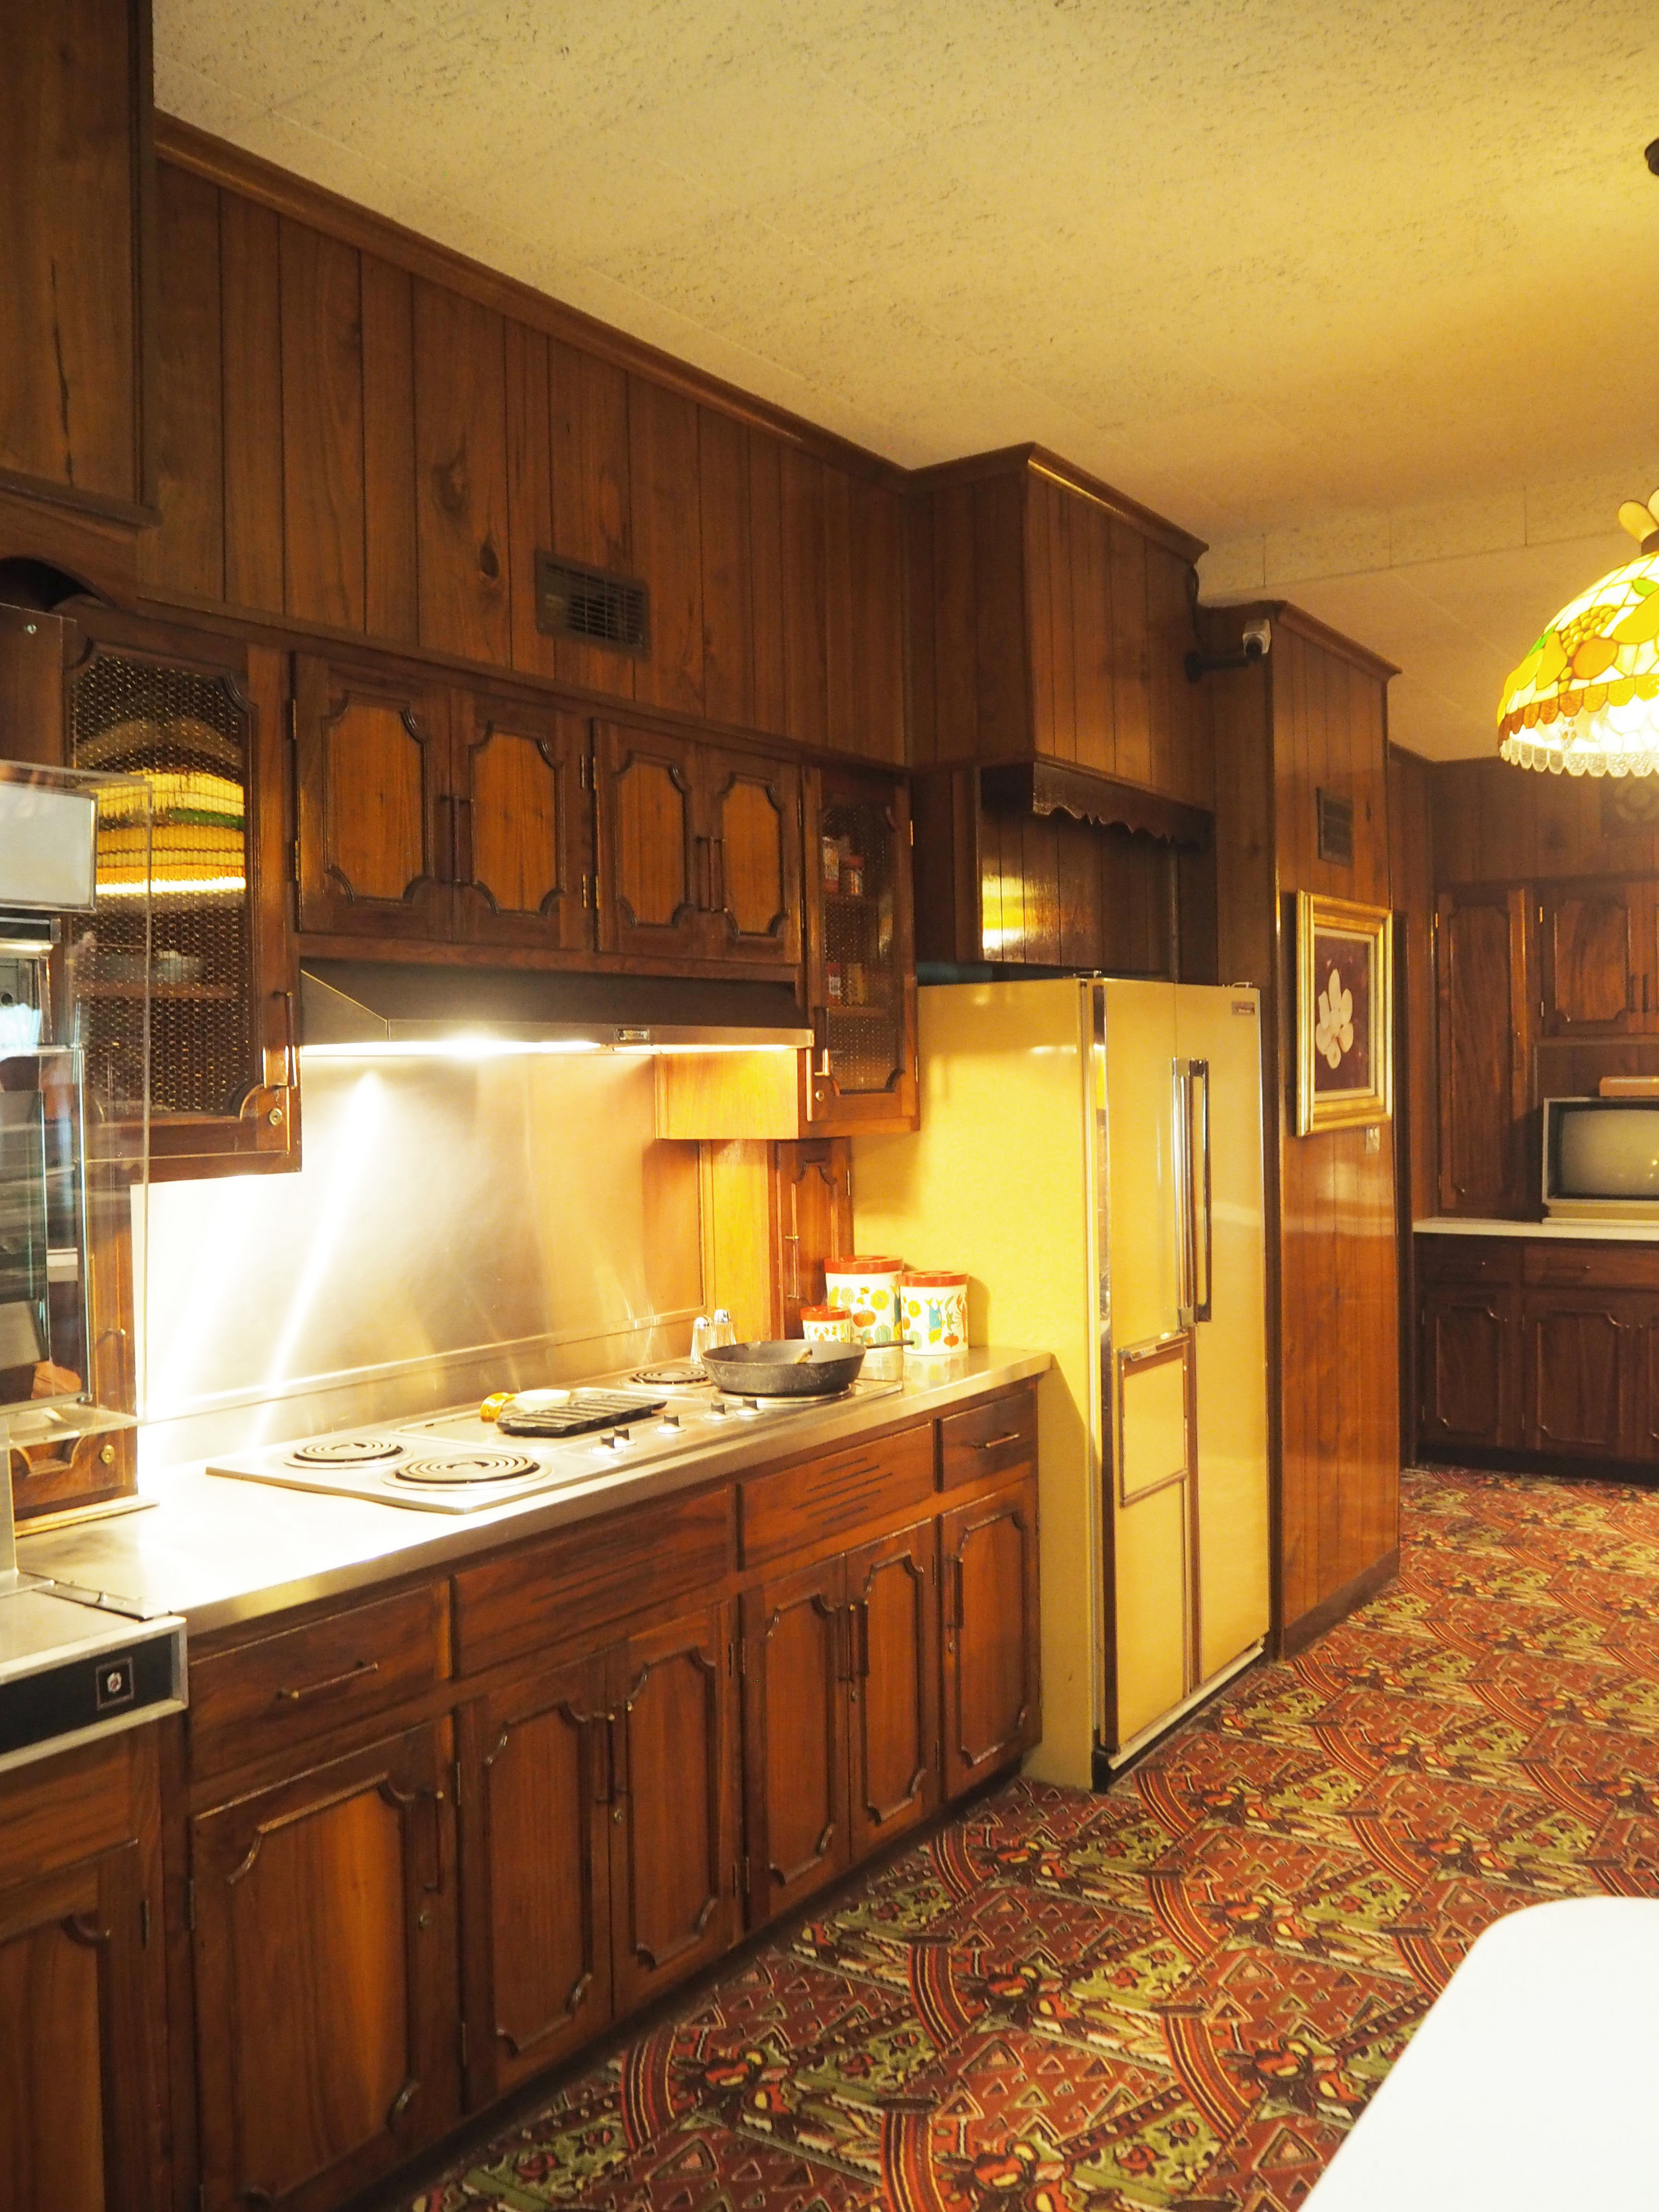  Elvis Presley's Graceland kitchen. To see more pics, click on the photo. 